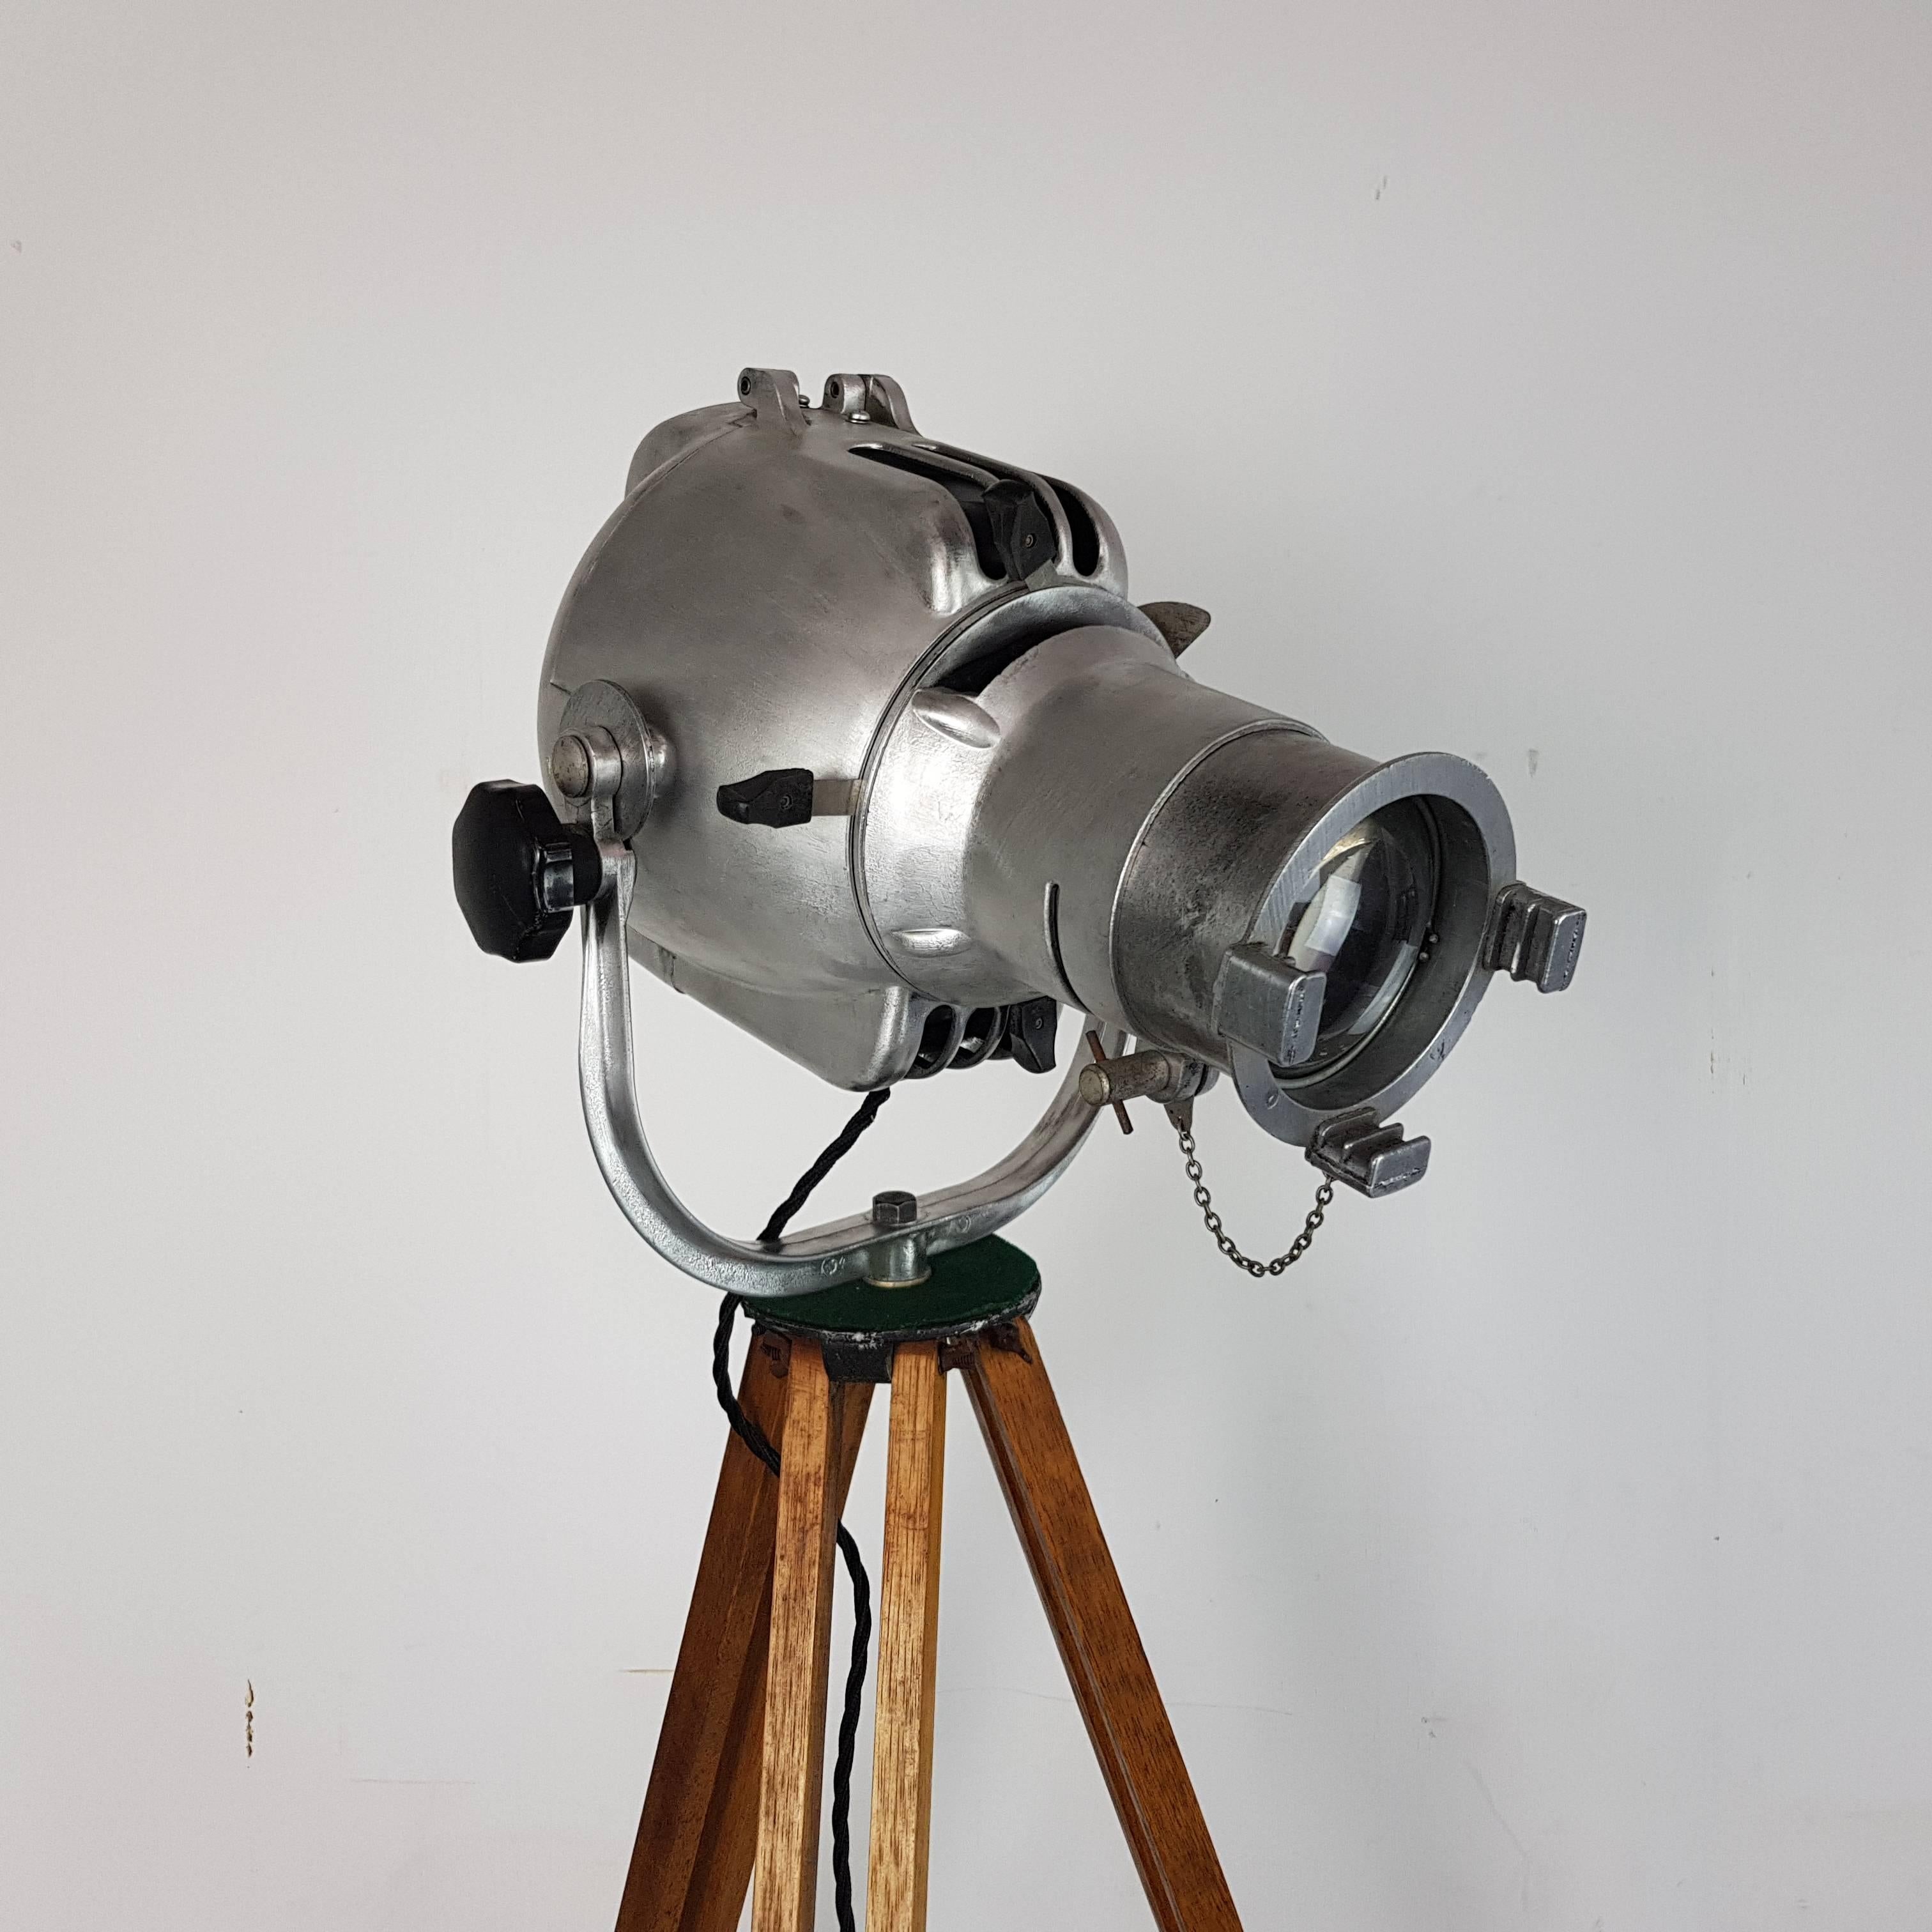 1960s Strand 23 theatre light, stripped and polished to a raw metal finish, mounted on a vintage wooden tripod.

The lamp is in full working order, has been newly rewired and has an on/off switch.

The bulbholder has been replaced with a new one